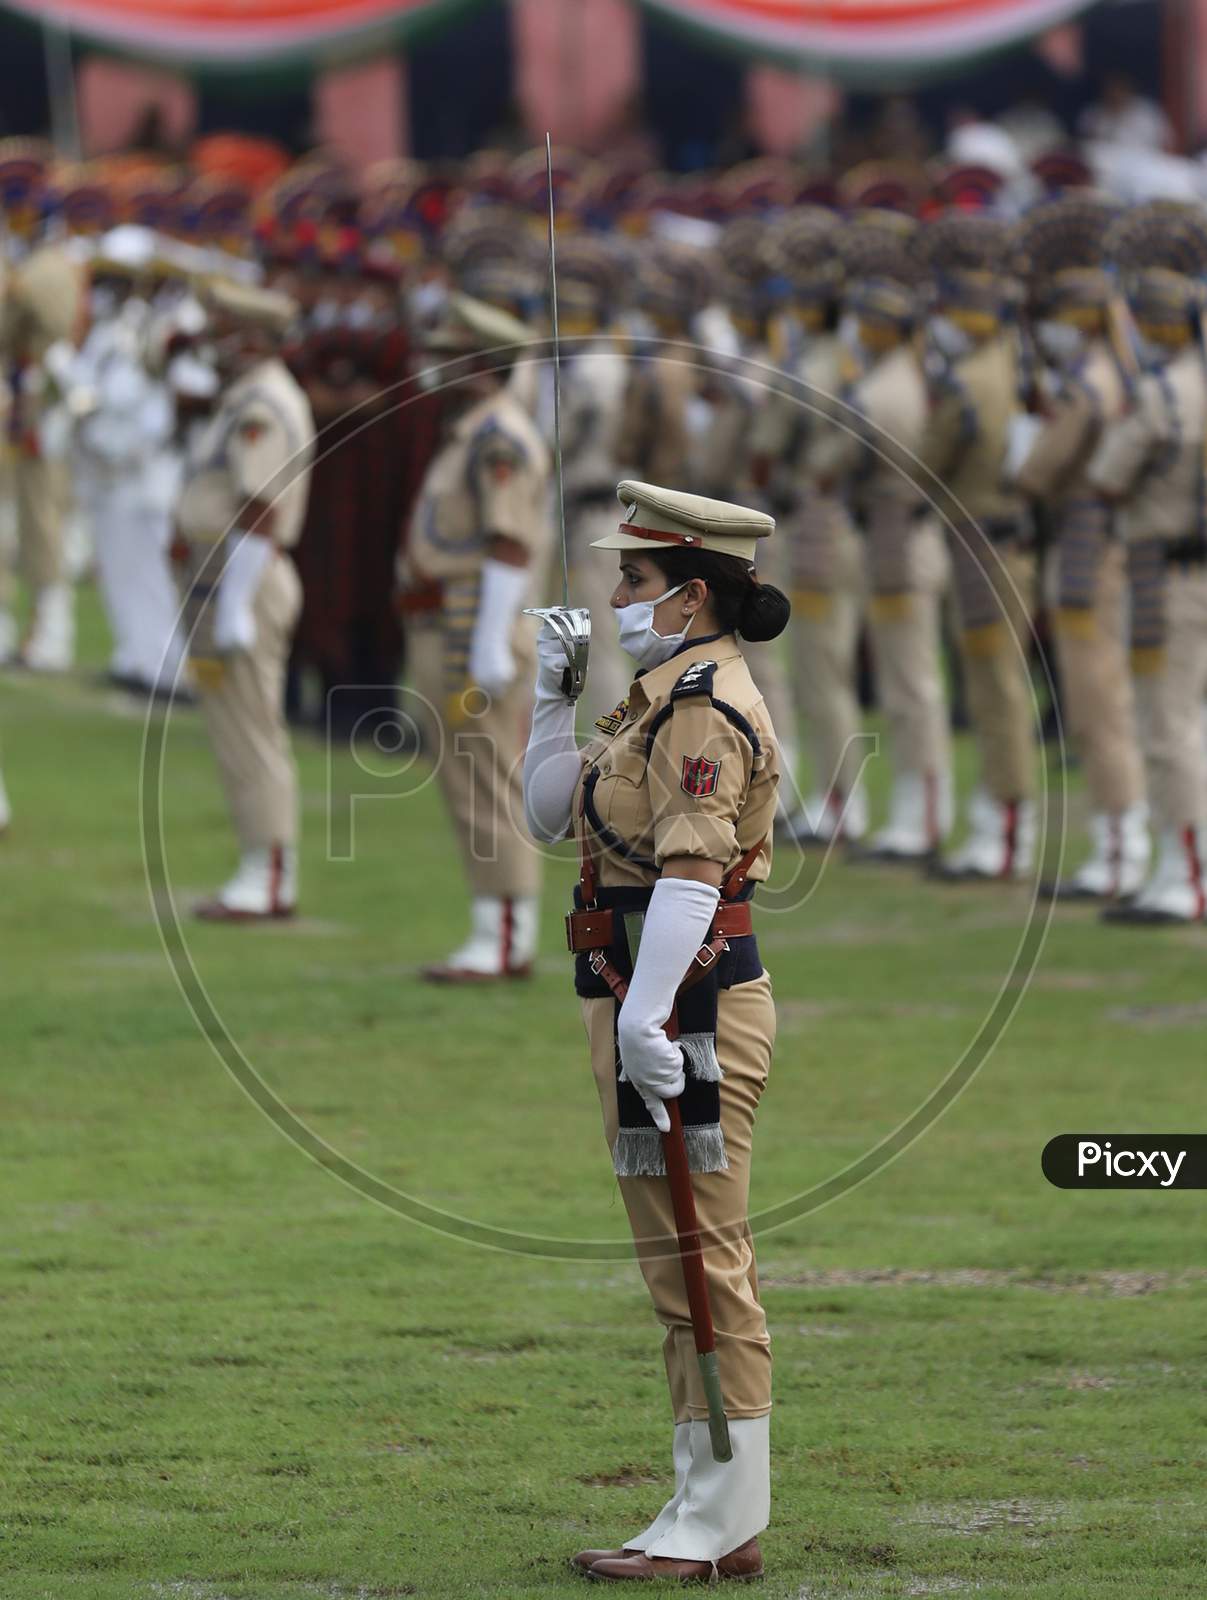 Jammu & Kashmir Police wears face masks during Independence Day parade in Jammu, on August 15 ,2020